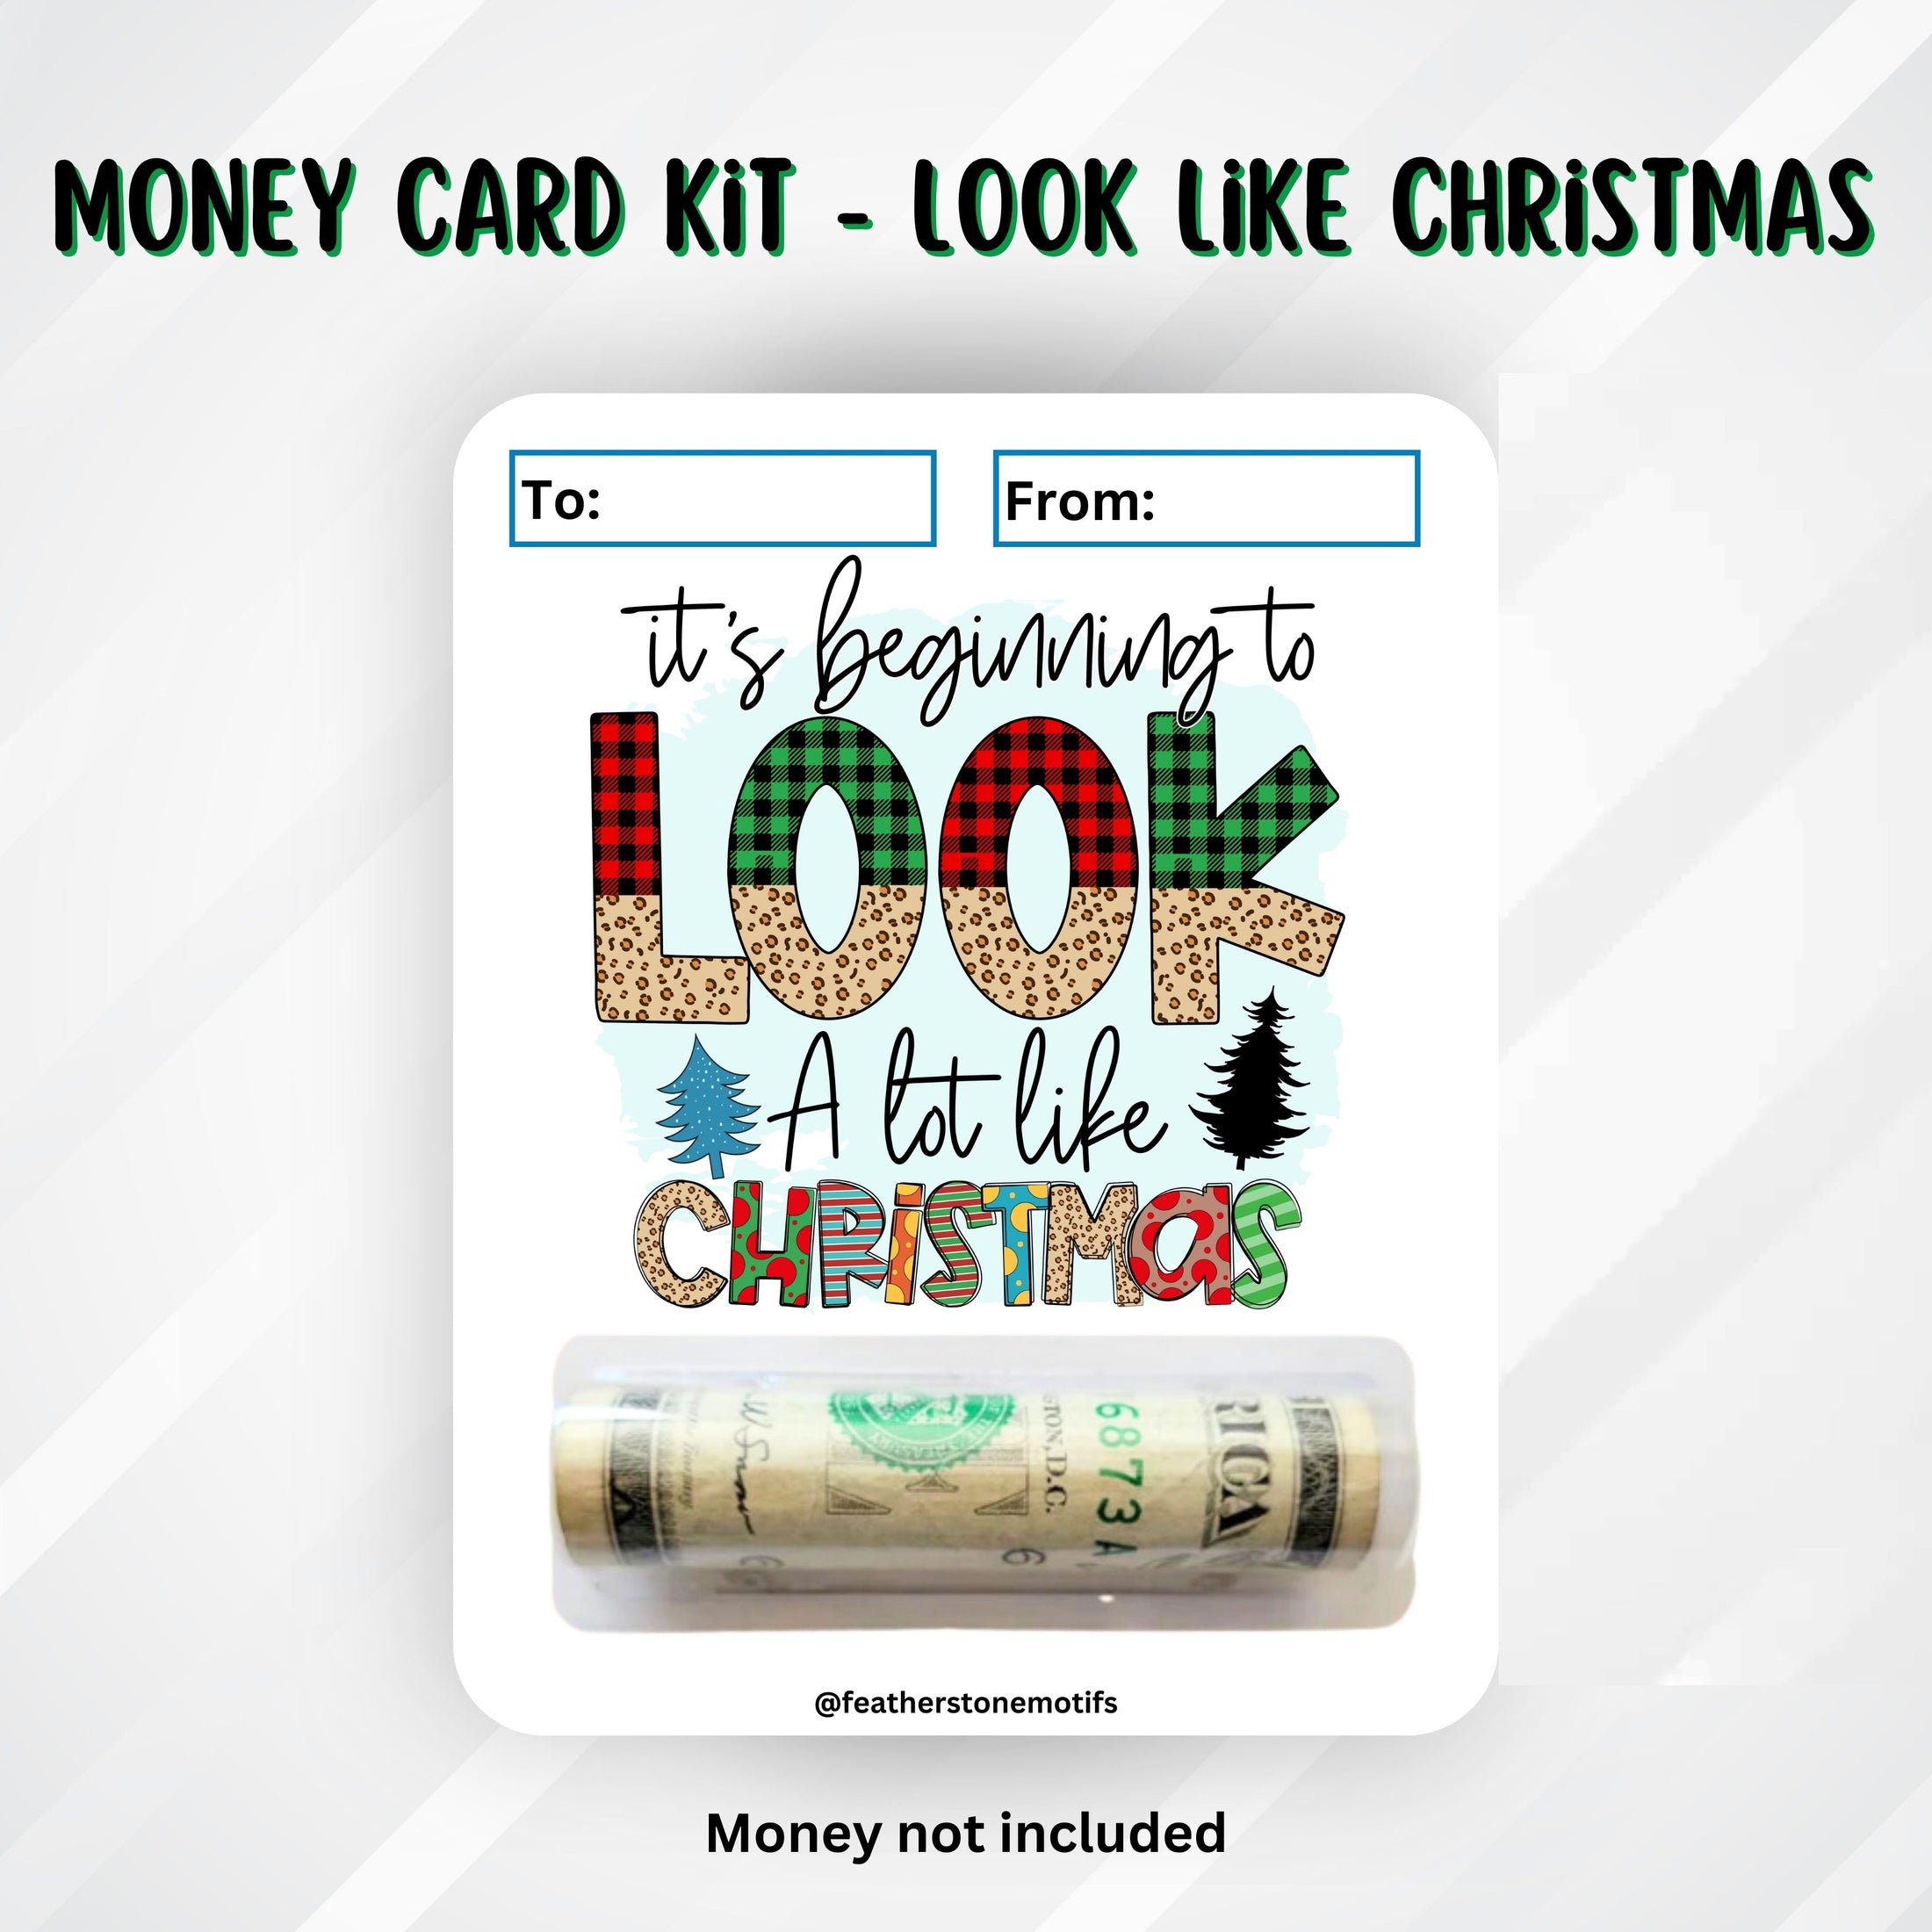 This image shows the money tube attached to the Beginning to Look a lot Like Christmas Money Card.